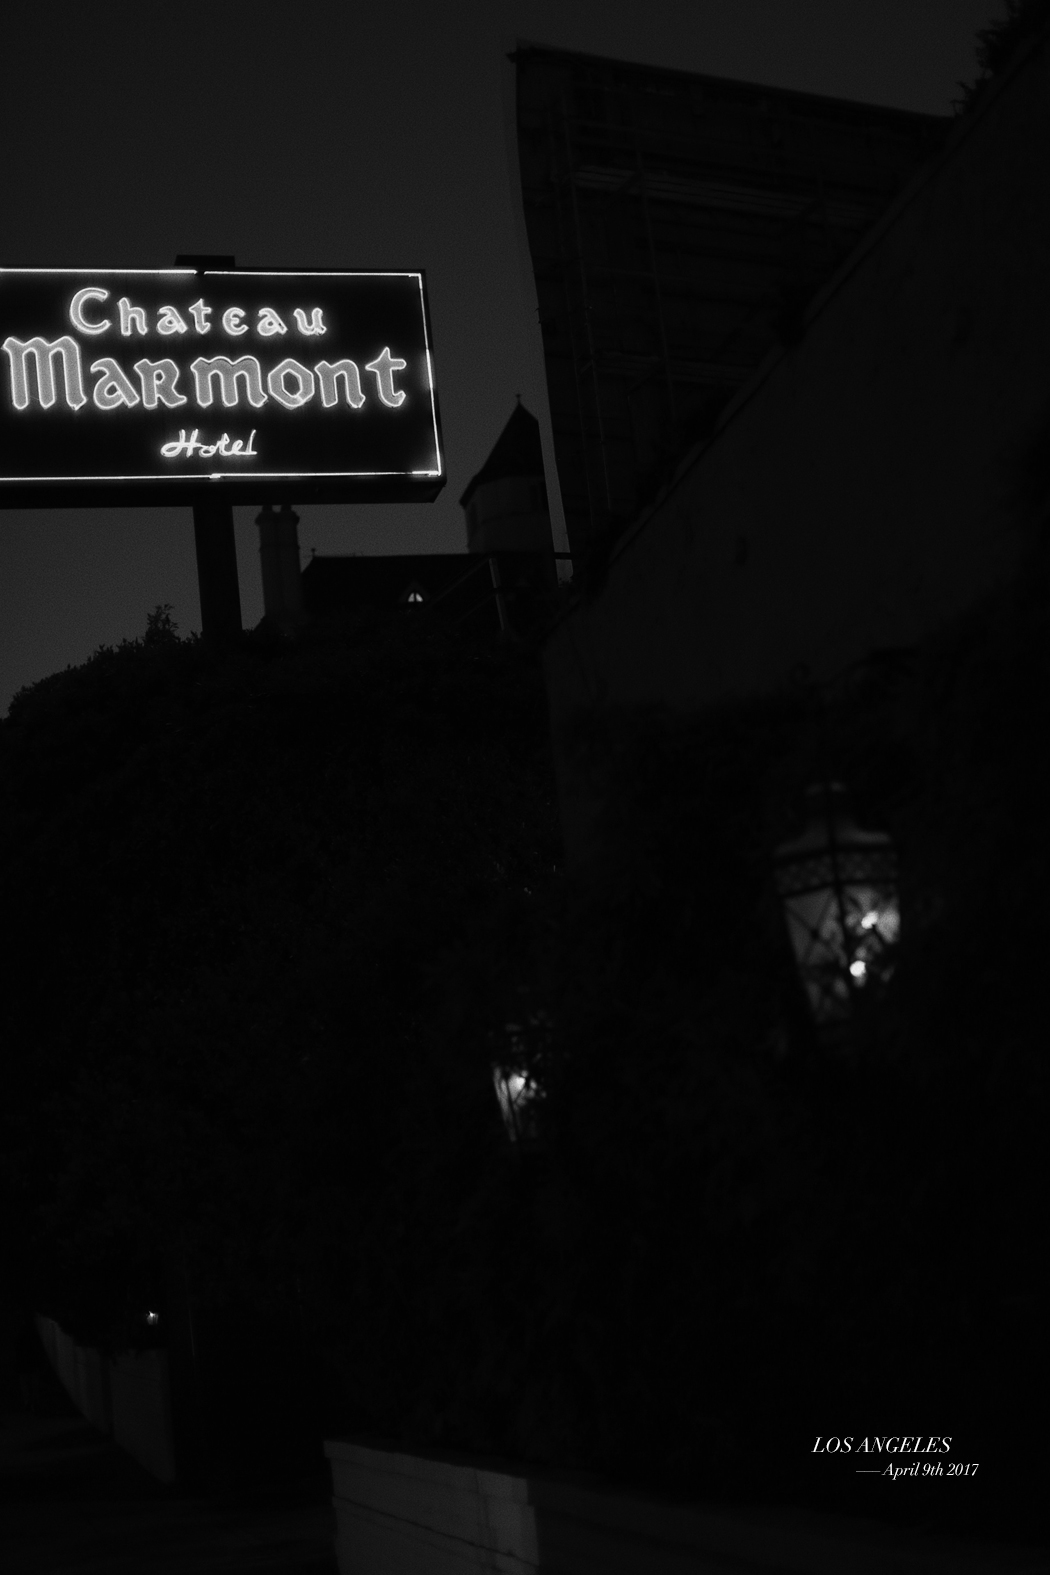 CHATEAU MARMONT - Hollywood, LOS ANGELES - Fiona Dinkelbach